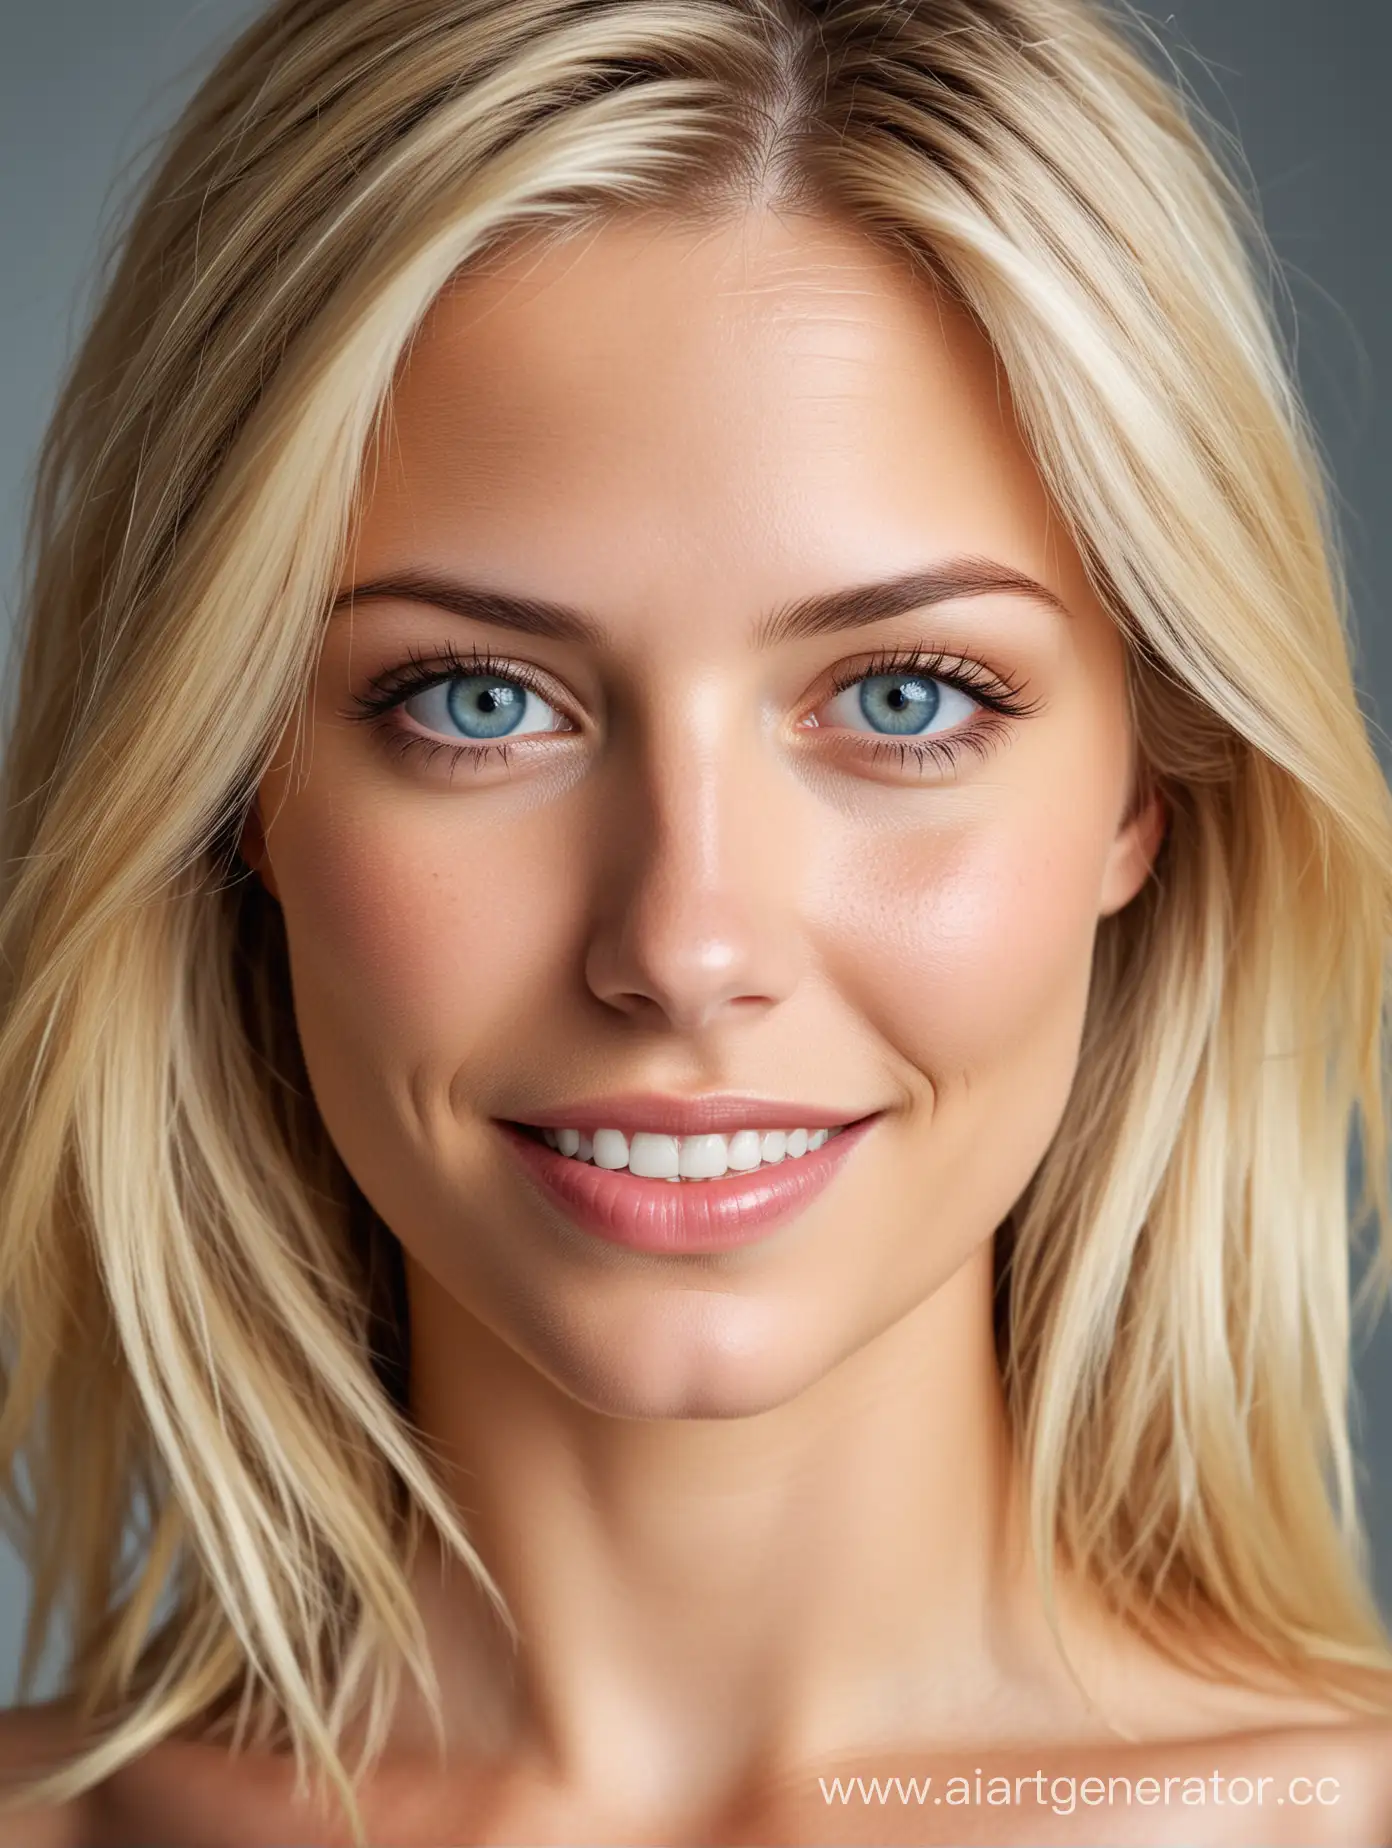 Detailed photograph of an incredibly beautiful, 30-year-old blond woman.
She looks dazzling. Straight hair, medium length, parted in the center. Naturally hanging close to her head.
Bright blue eyes. Self-confident.
Casual dressing. Bright colors.
Enchanting smile. Perfect teeth. Front view. From the Waist up. Looking at the camera, as if inviting people to join her incredible world.
Please keep the image visible from the waist up,  leaving room around her figure, at the top, and on the sides.
